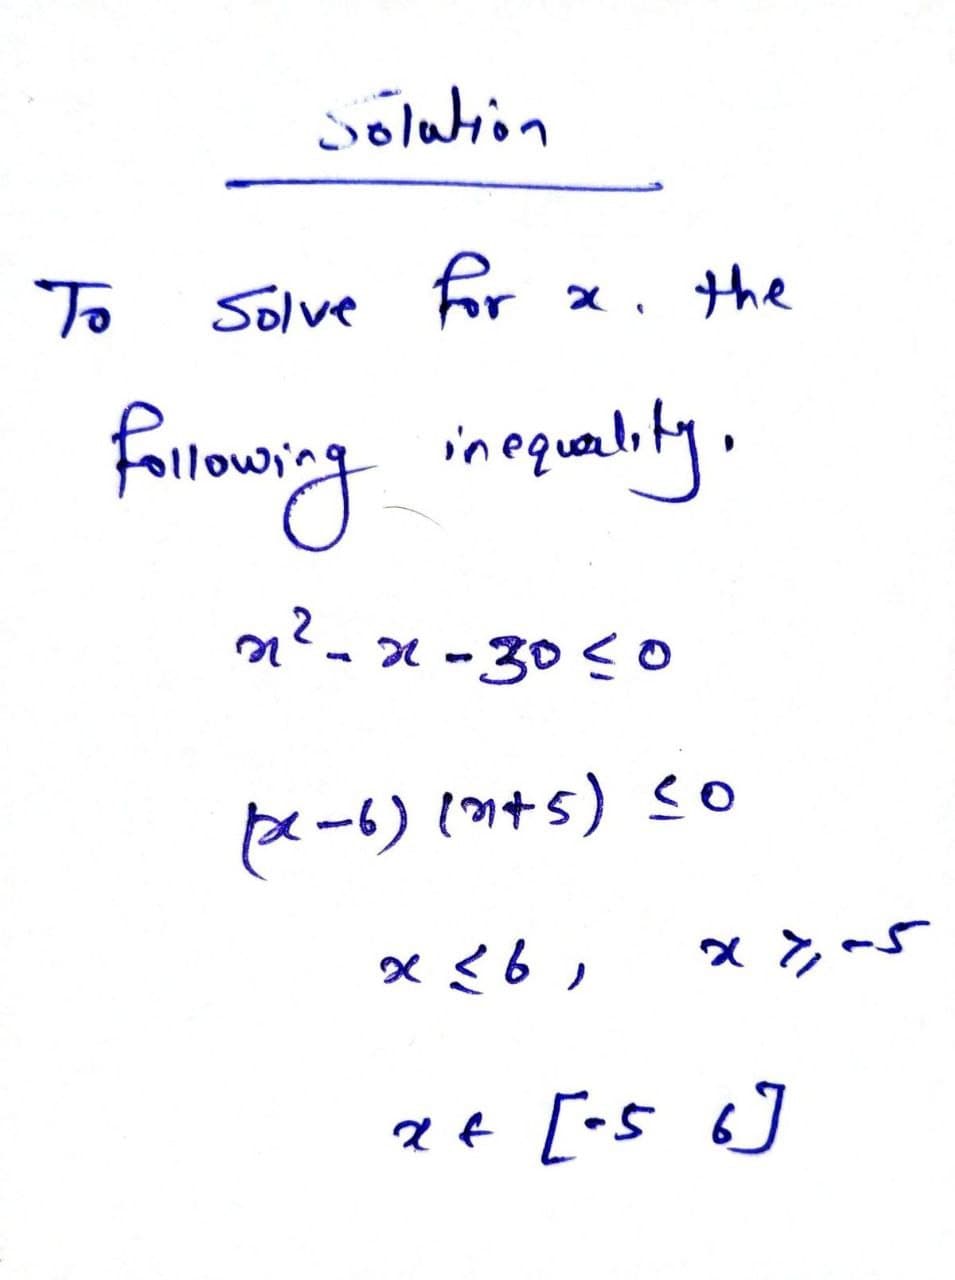 solution
To
Solve for
following inequality,
n²-x-30≤0
(xx-6) (91+5) ≤0
x 26,
x + [-5 6]
x. the
x>, -5